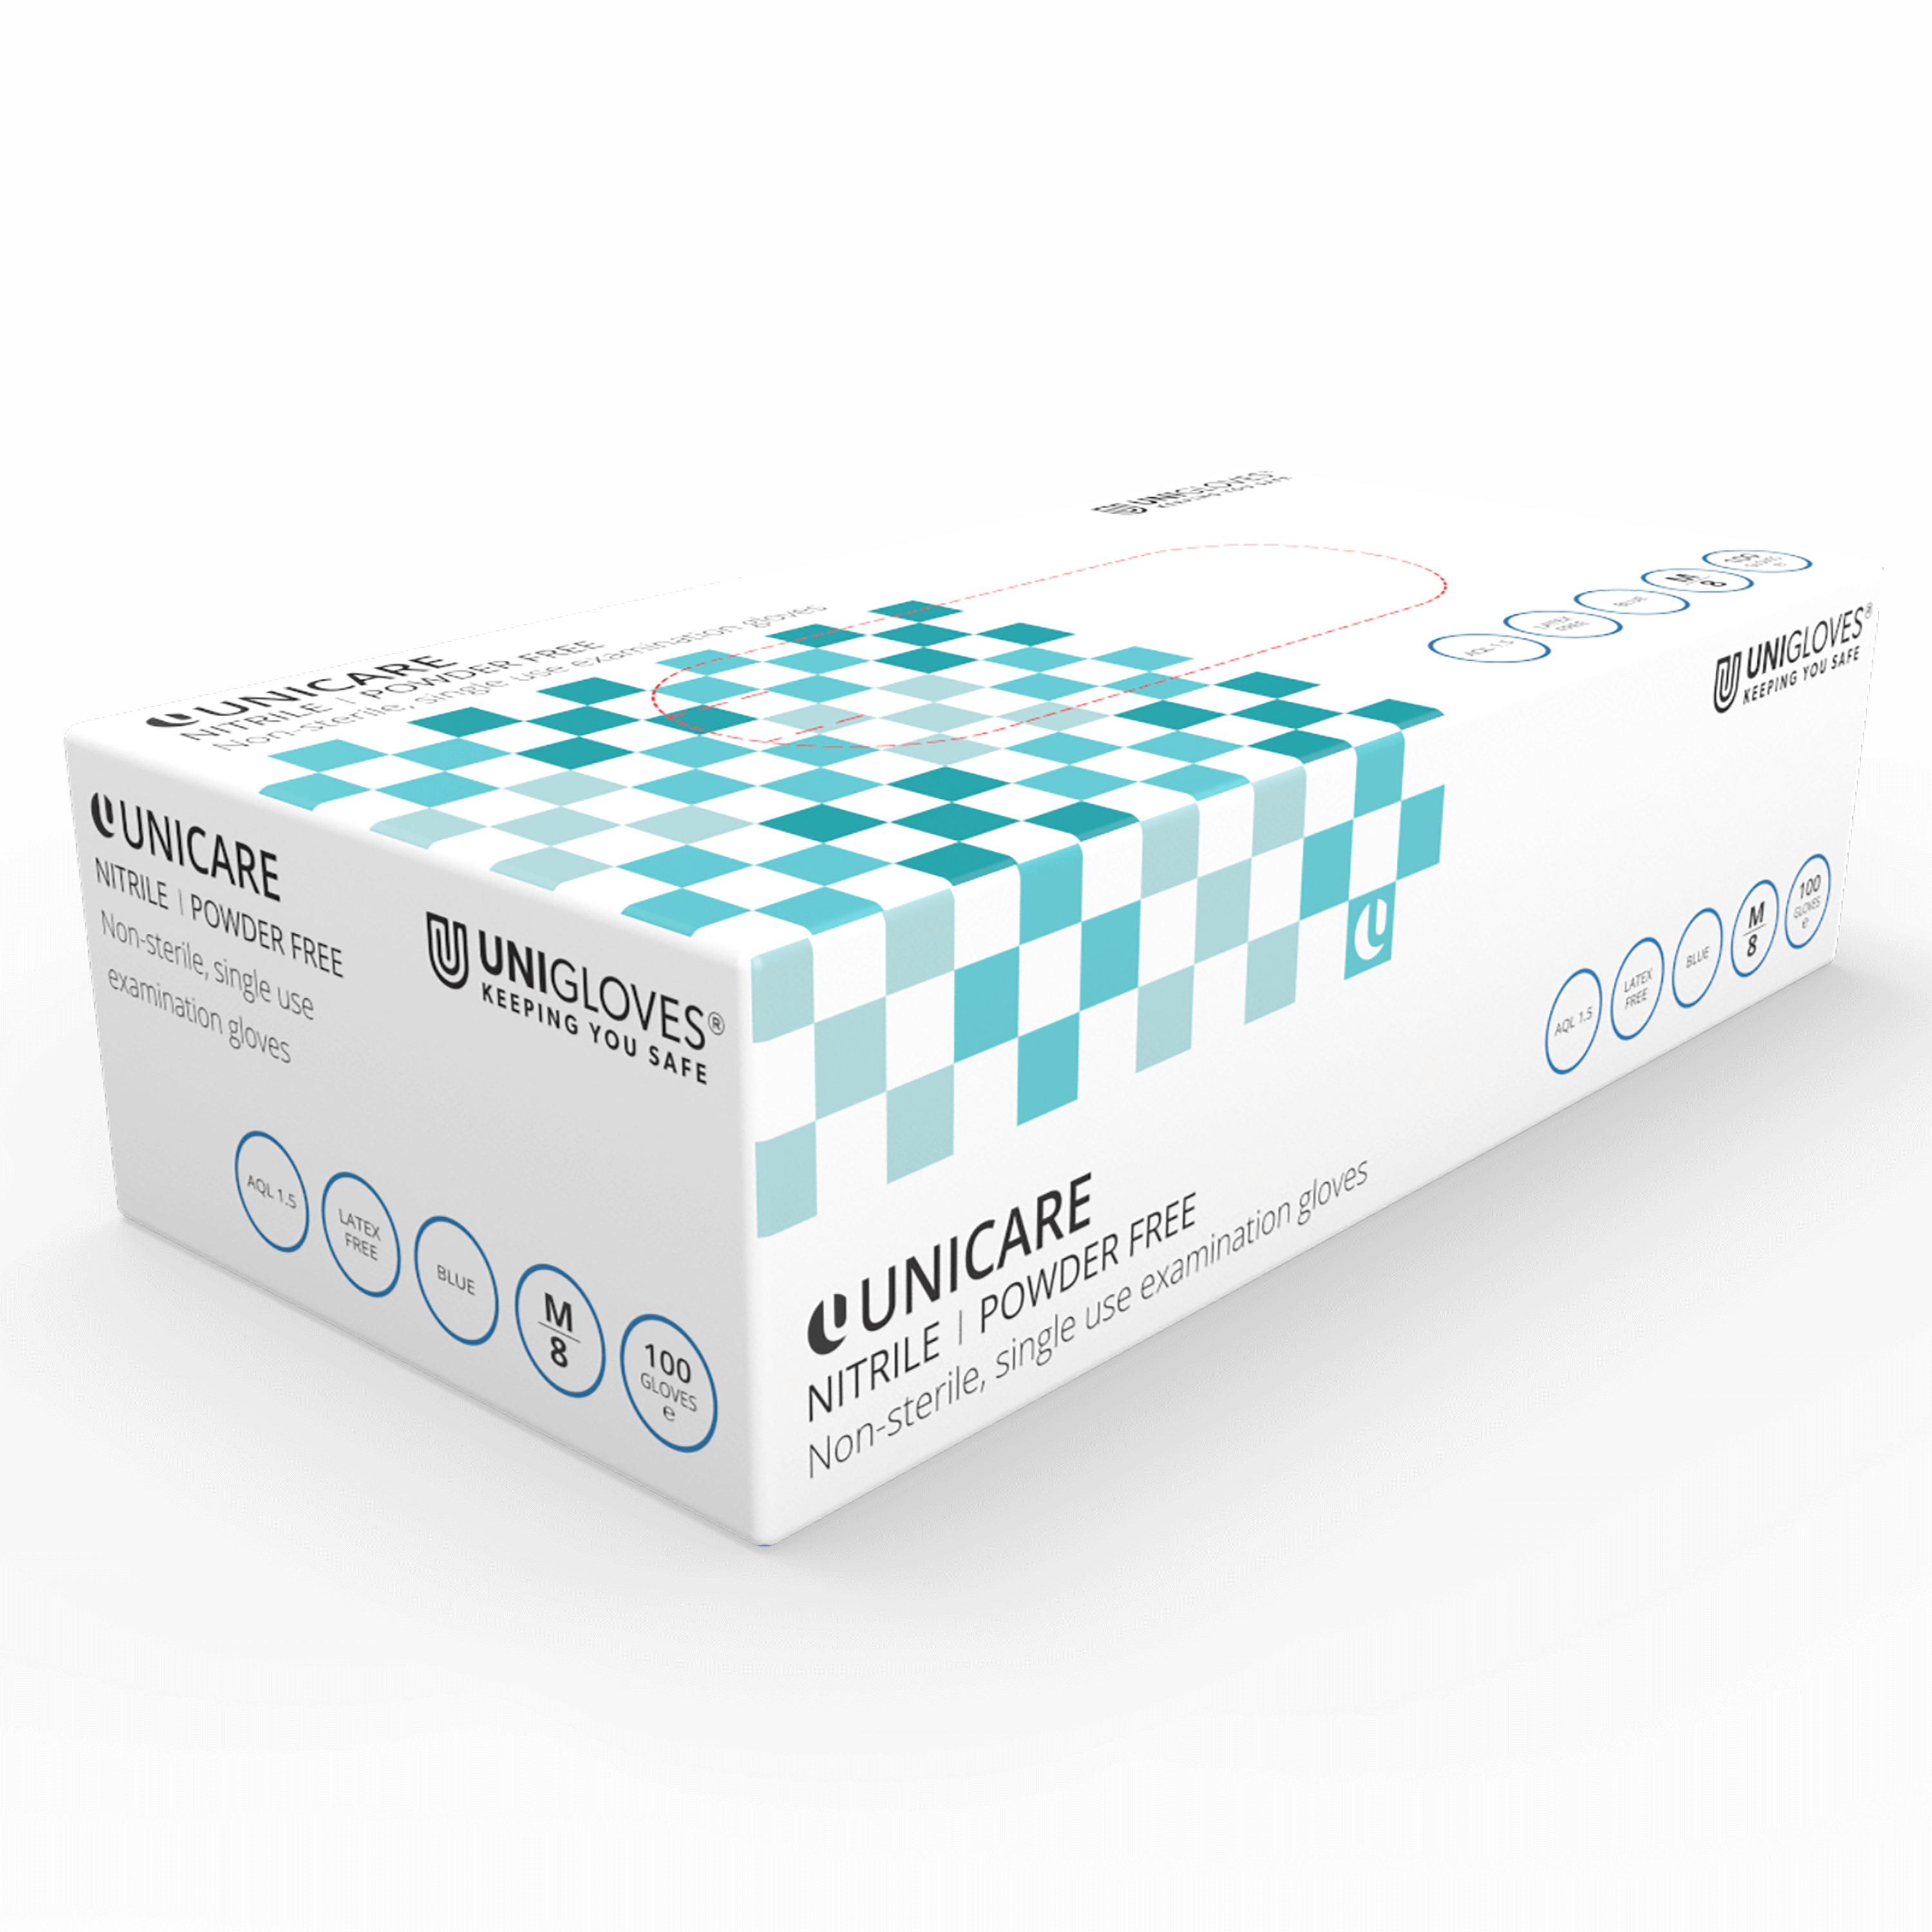 Unicare Nitrile Small - Powder-Free Medical Examination Gloves  - Cases of 10 Boxes, 100 Gloves per Box